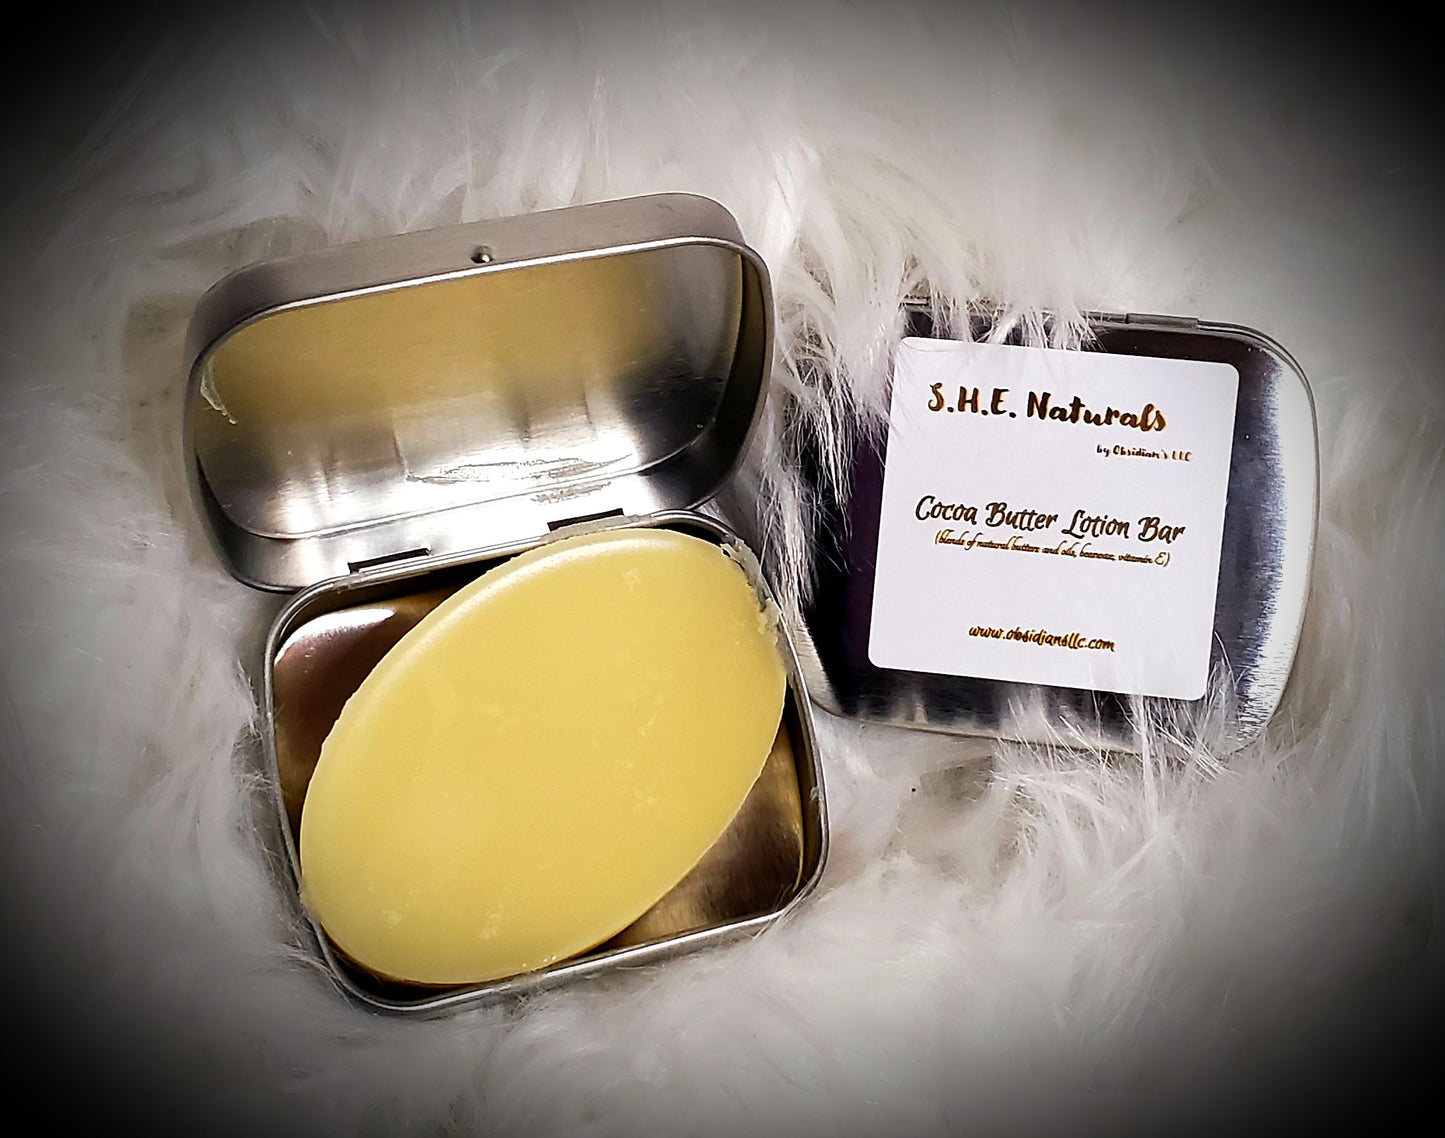 Cocoa Butter Lotion Bar - Obsidian's LLC